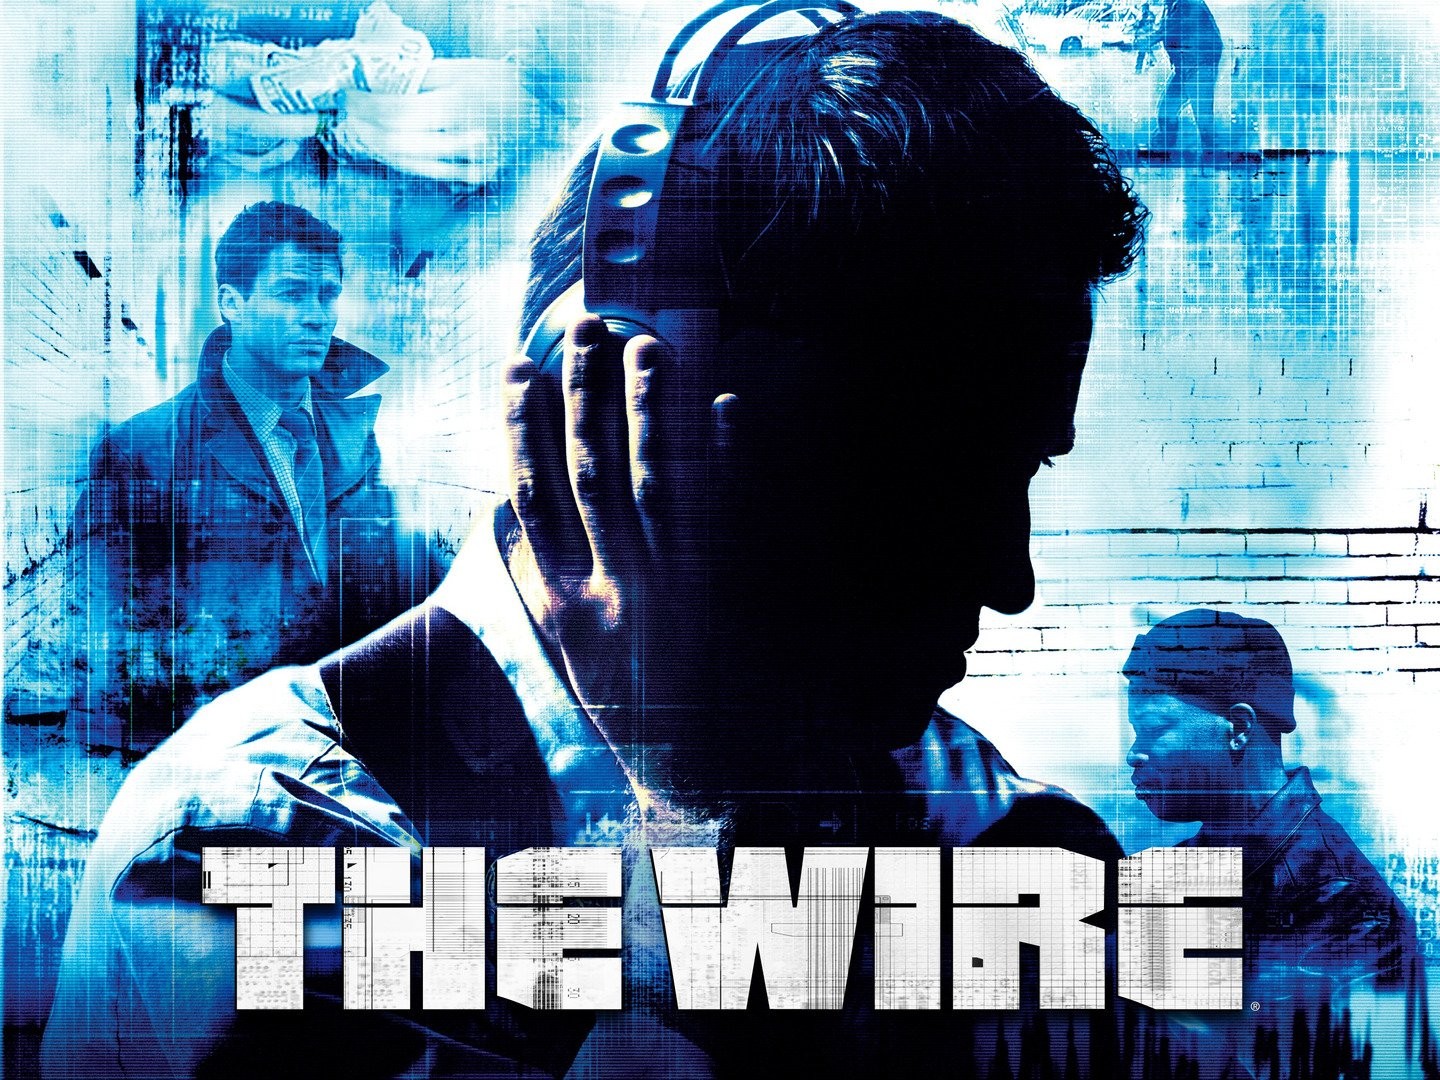 The Wire Season 1 Review - W2Mnet